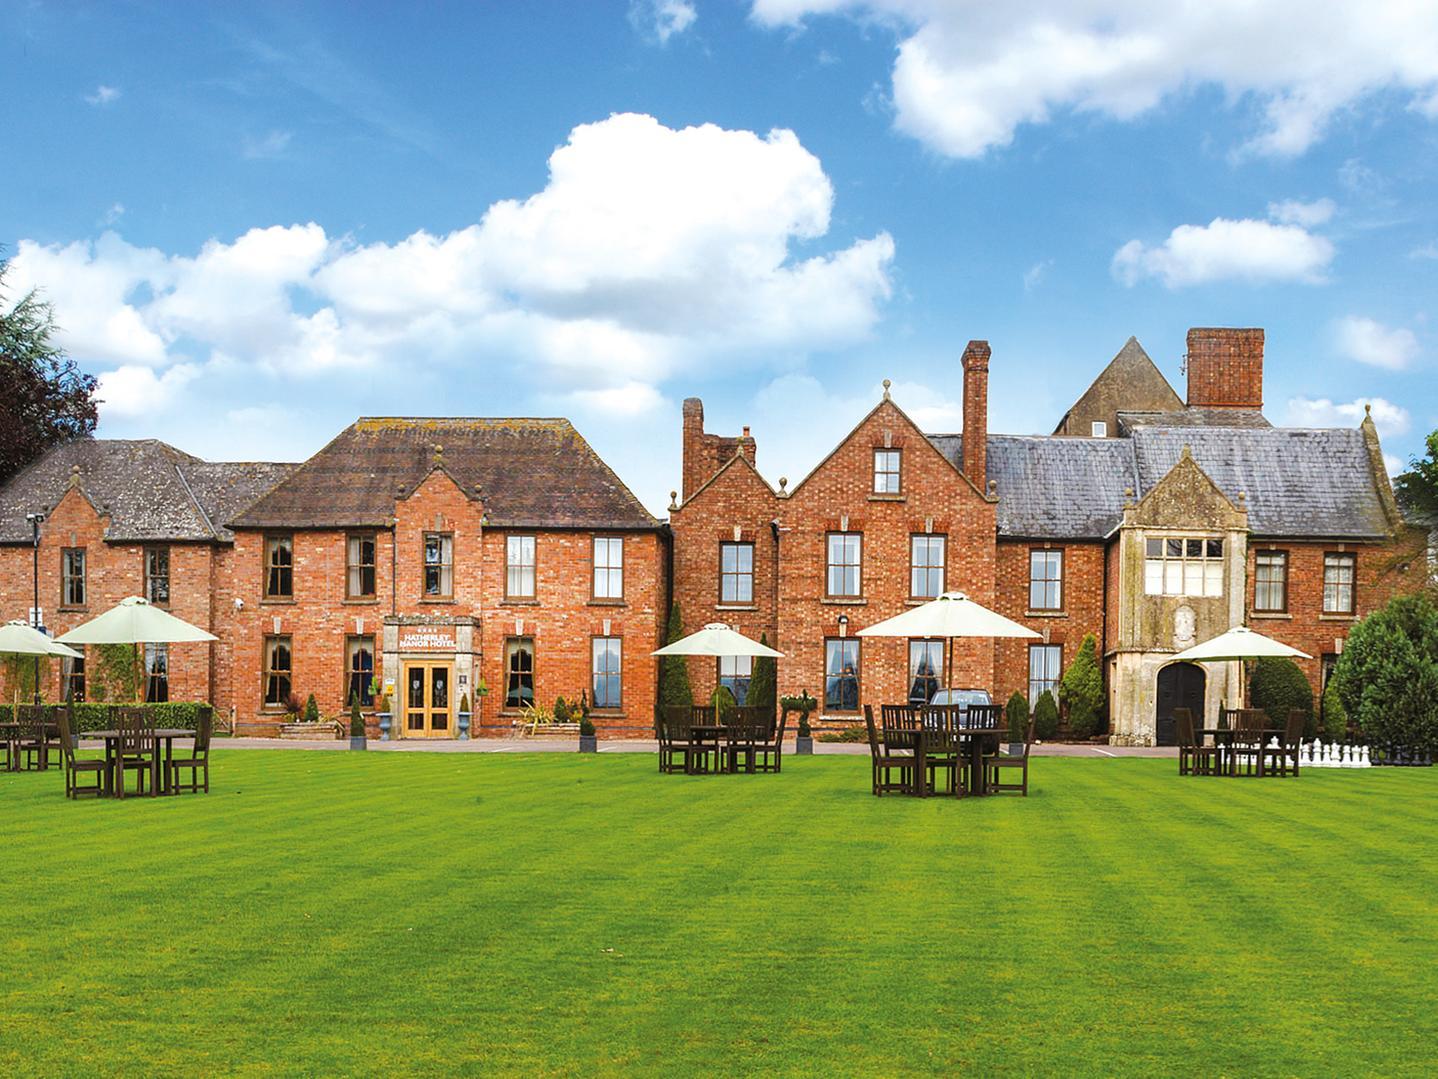 Hatherley Manor Hotel and Spa is located in the picturesque Gloucestershire countryside, and offers a serene stay with 55 opulent rooms to choose from and calm-inducing spa.